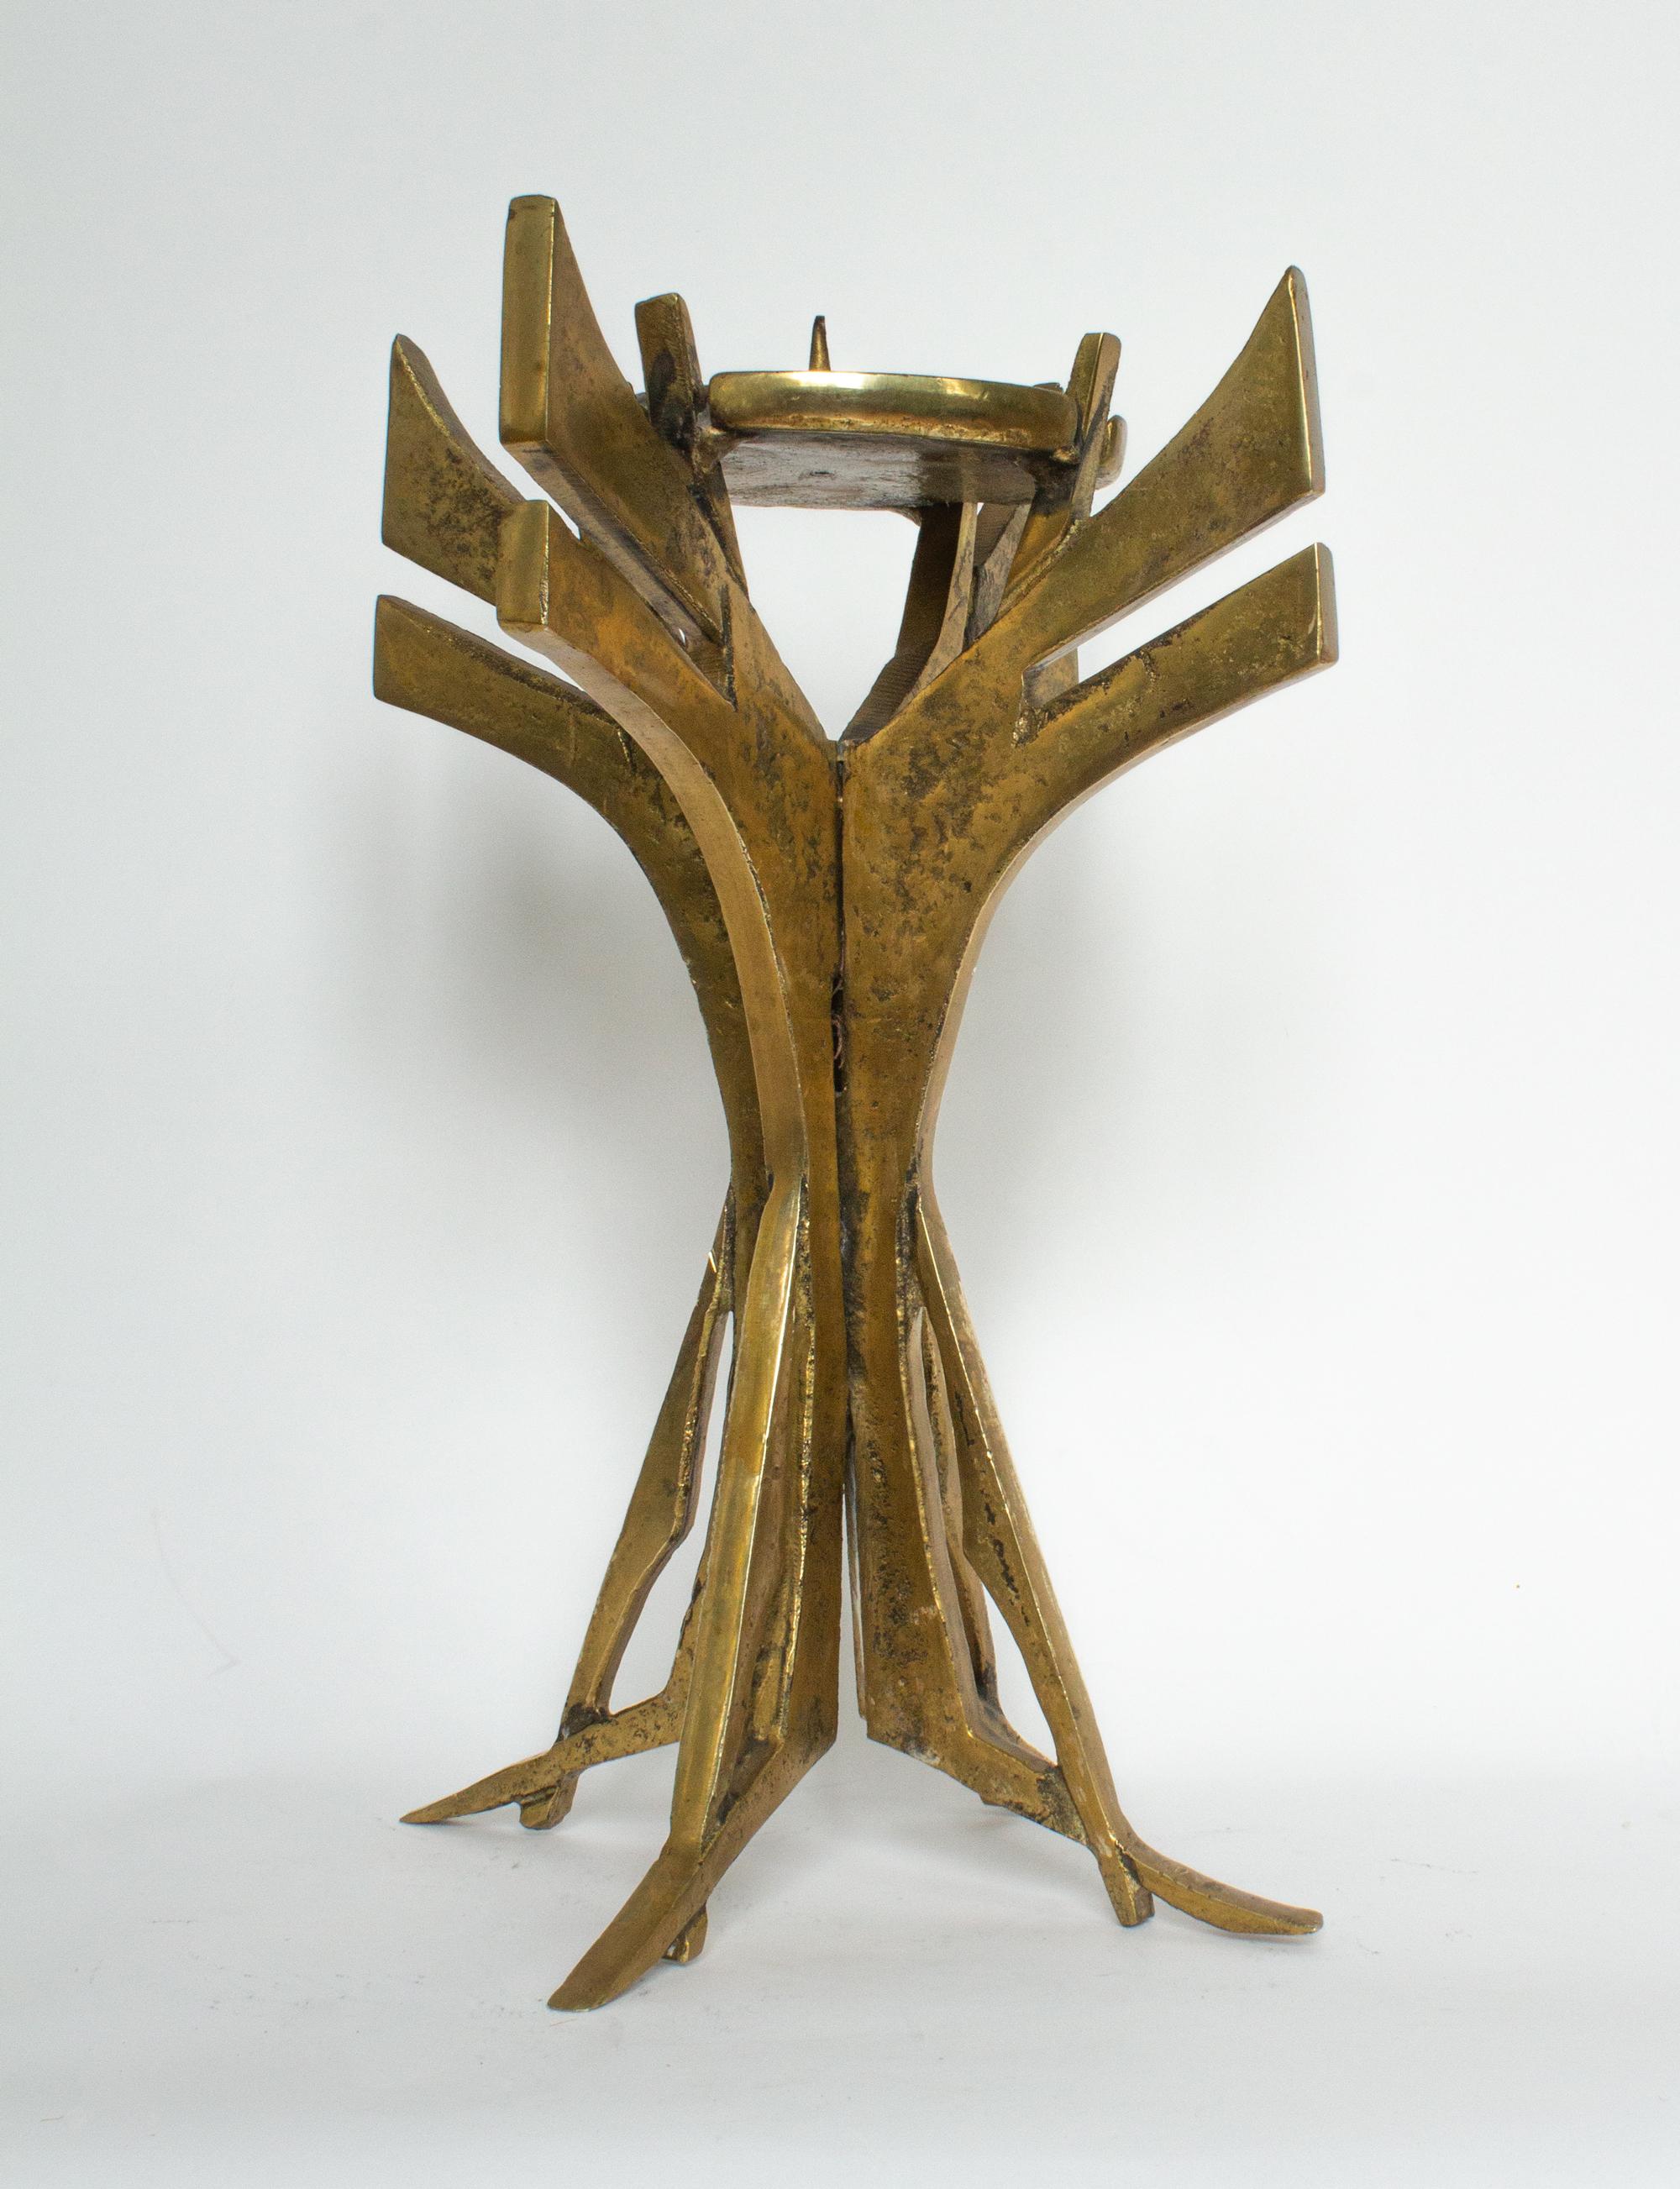 Swedish modern Brutalist modern church candleholder in brass. A heavy piece, in good vintage condition with an aged patina. There are signs of wear as one might expect from age and use, including light scratches.